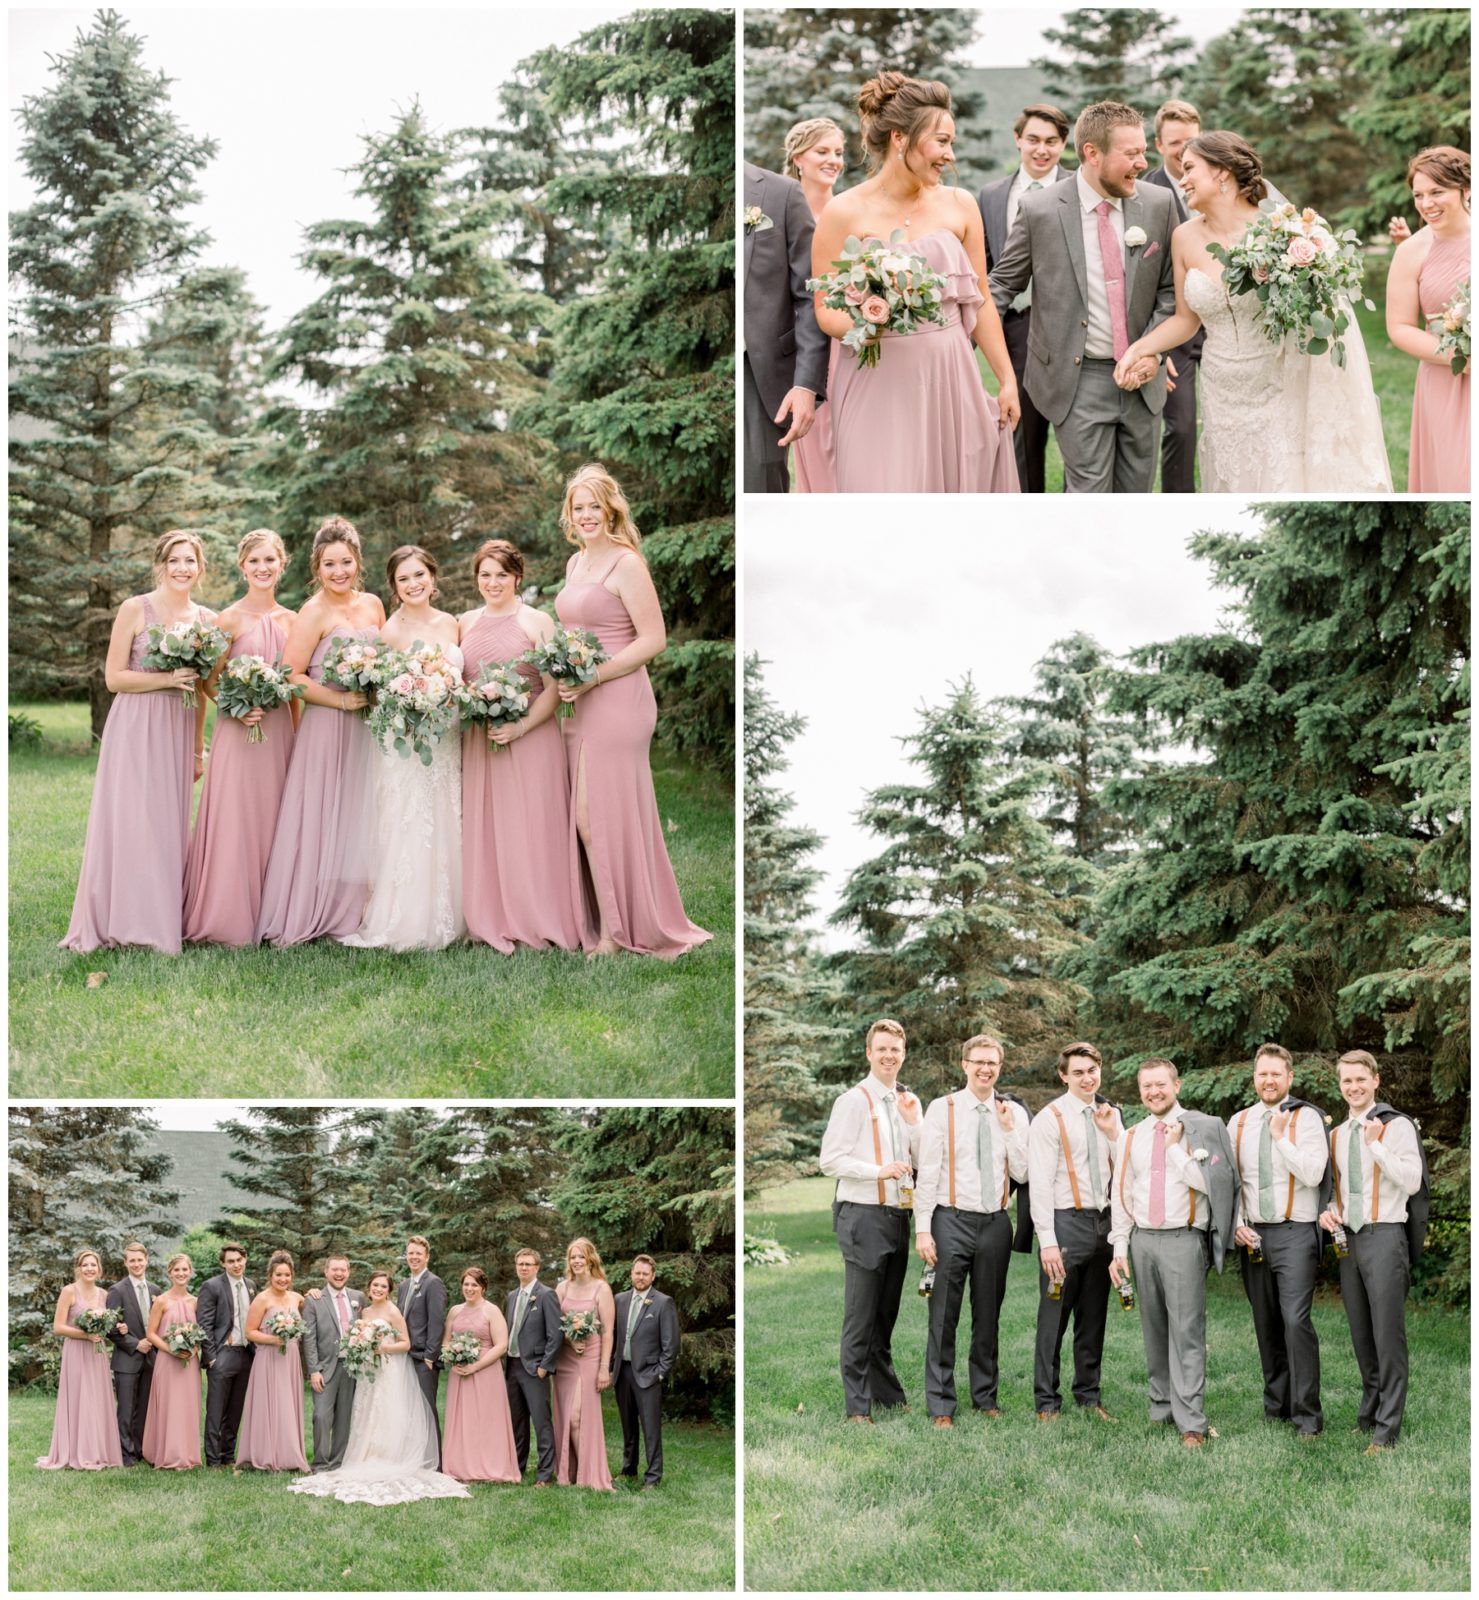 Compilation of photos of the bride with her bridesmaids and the groom with his groomsmen.